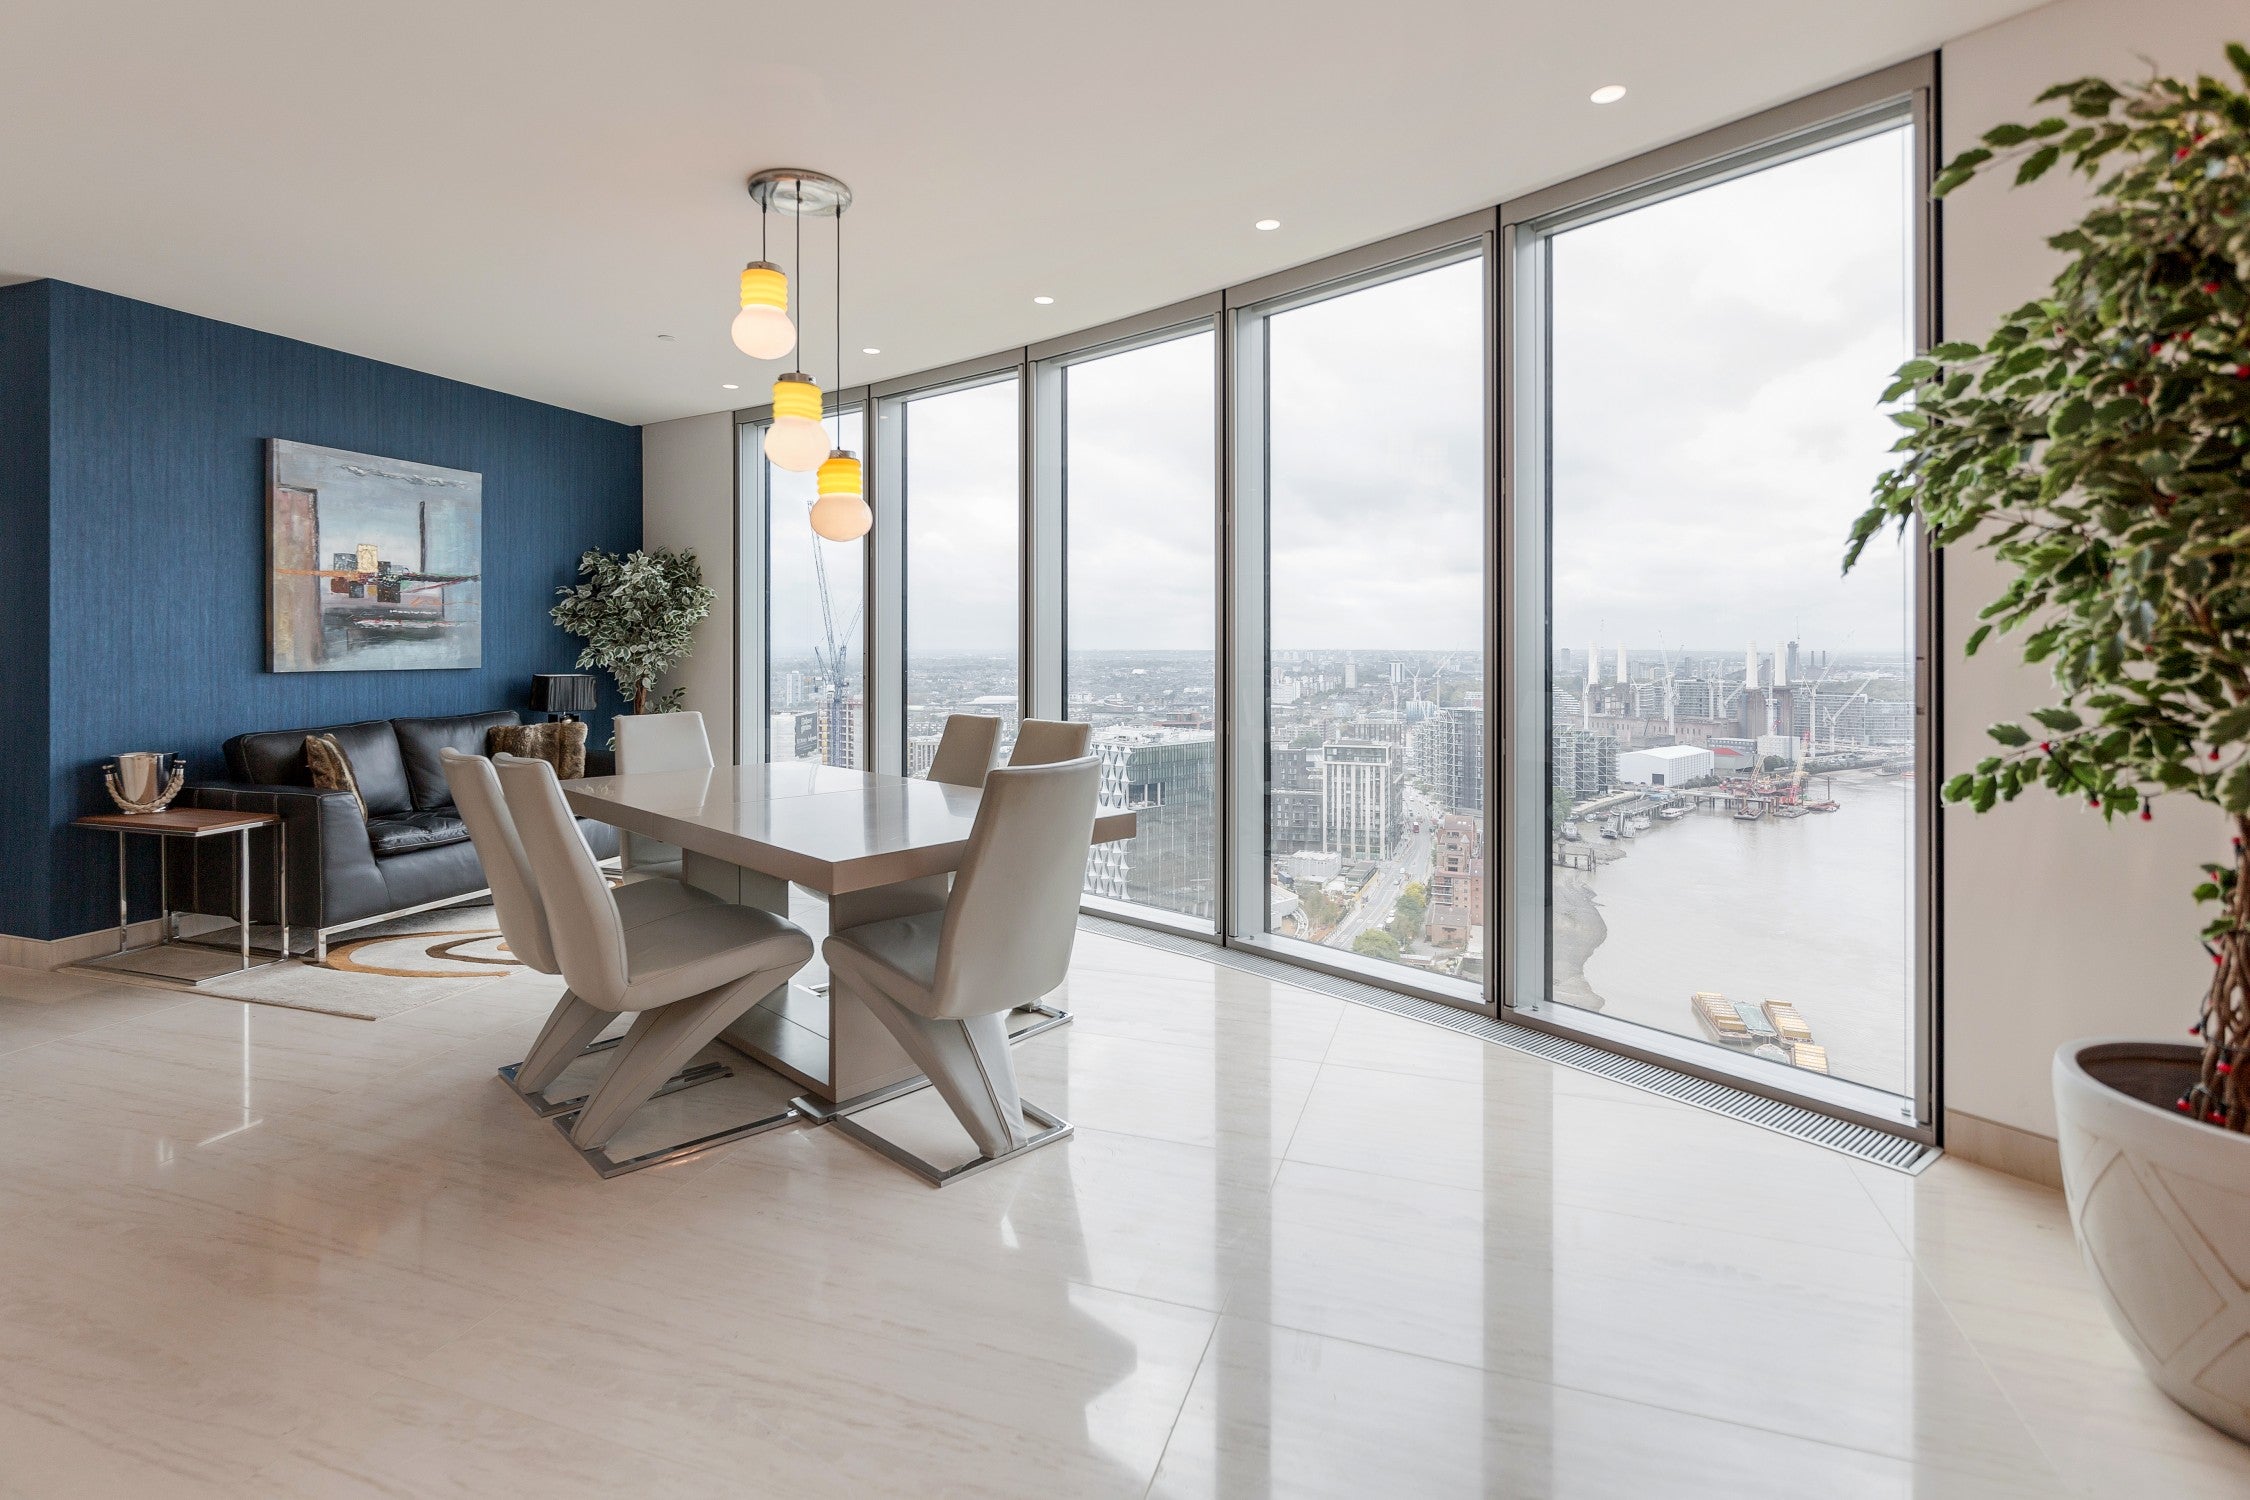 This sleek high-rise benefits from a bird’s eye view of the Thames